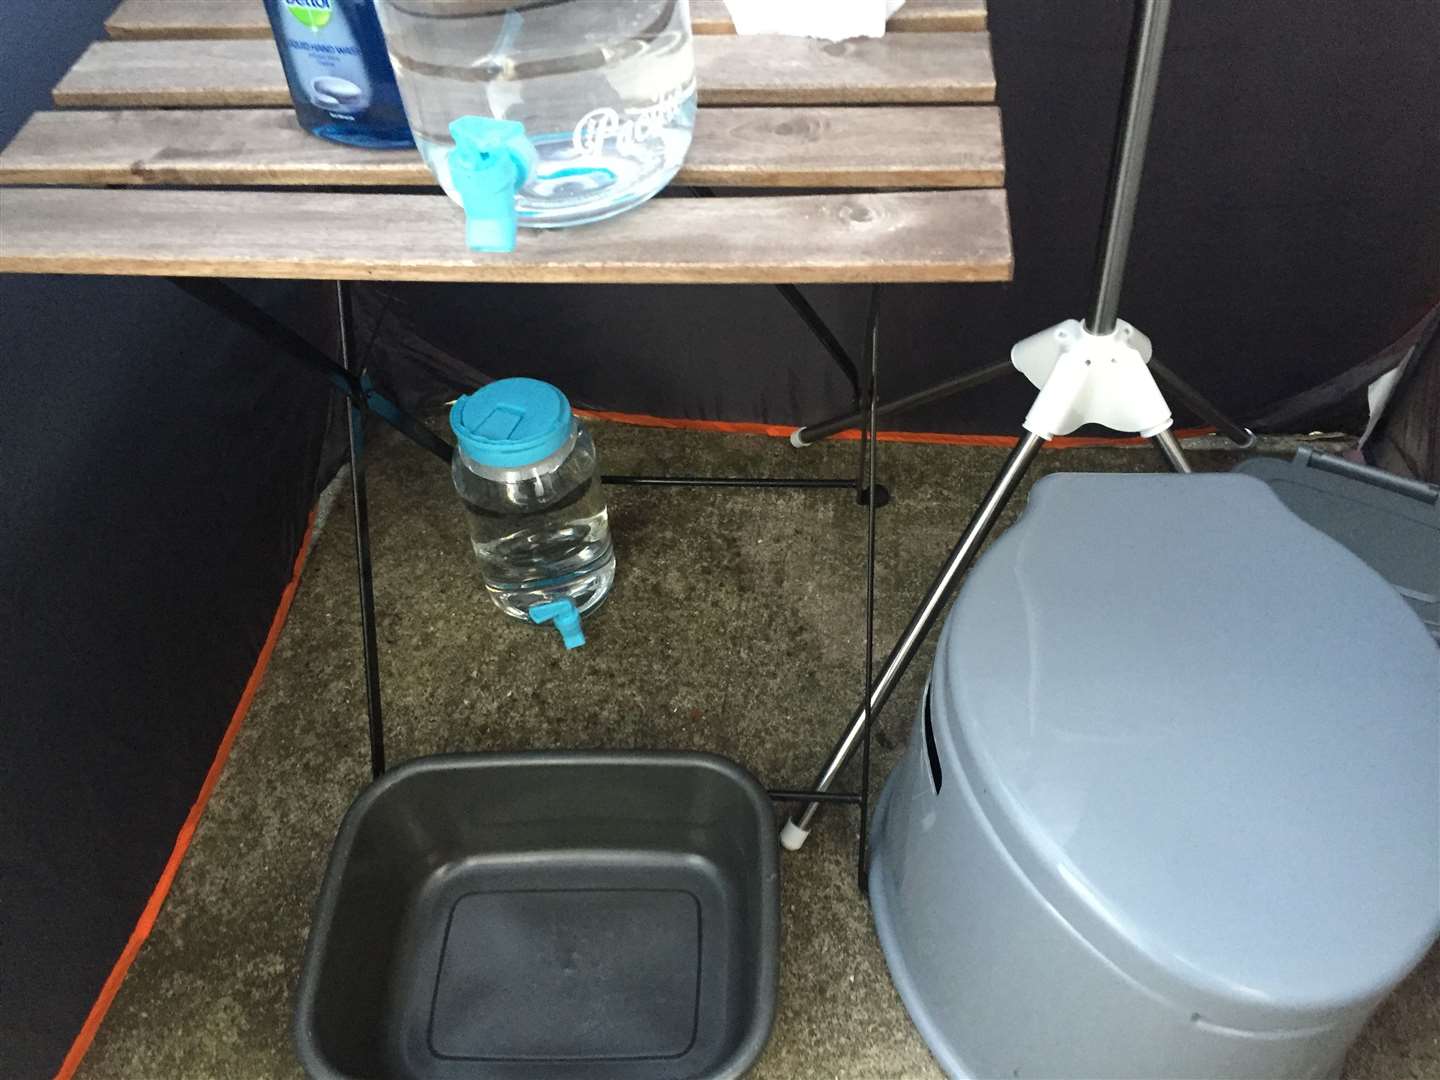 The tented toilet